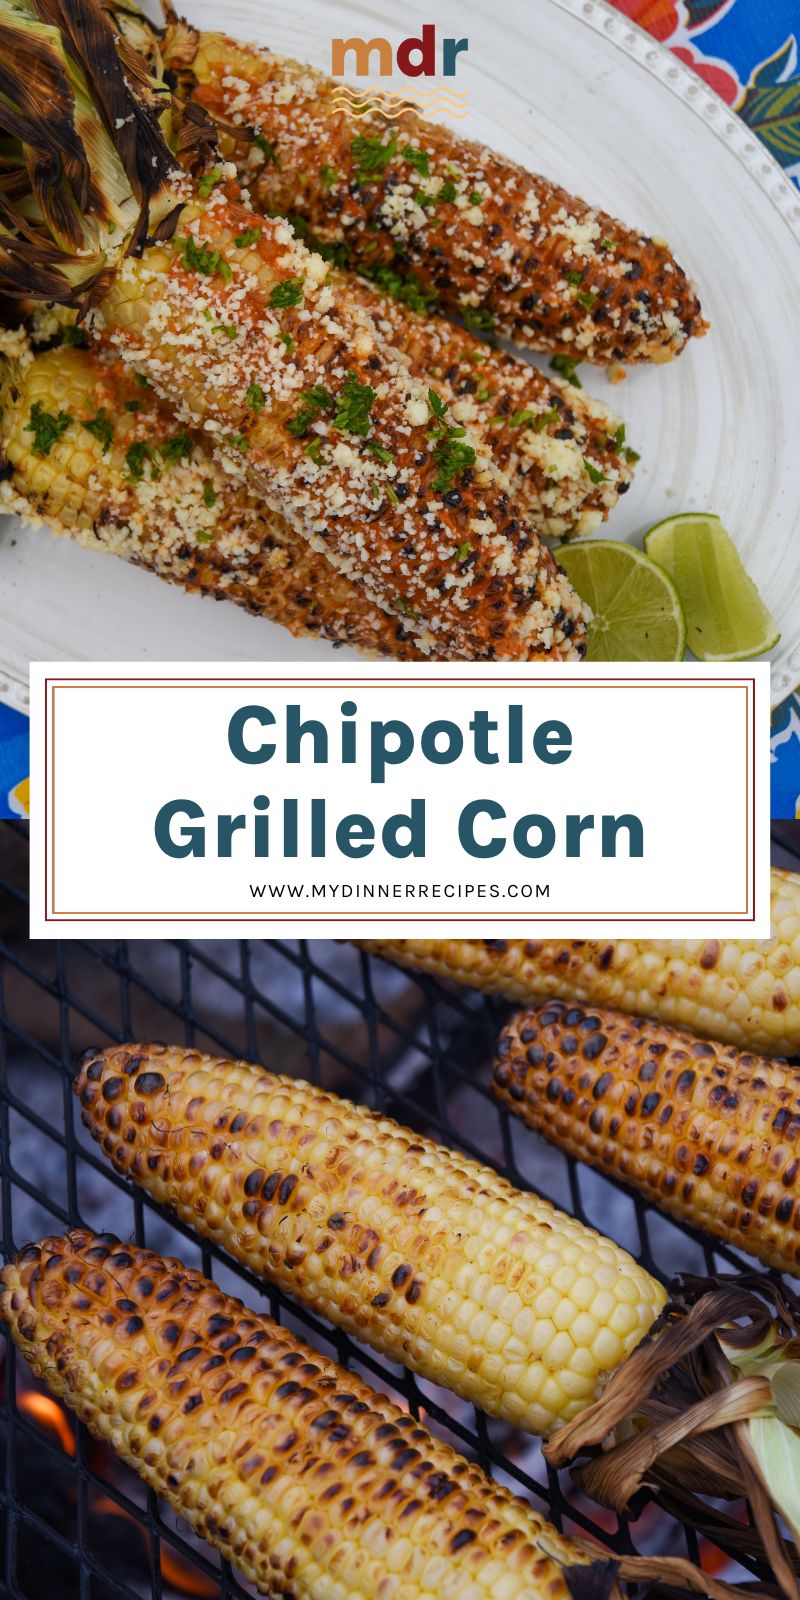 top image: chipotle grilled corn ears on a white platter with lime wedges
bottom image: ears of corn over white hot coals on a grill